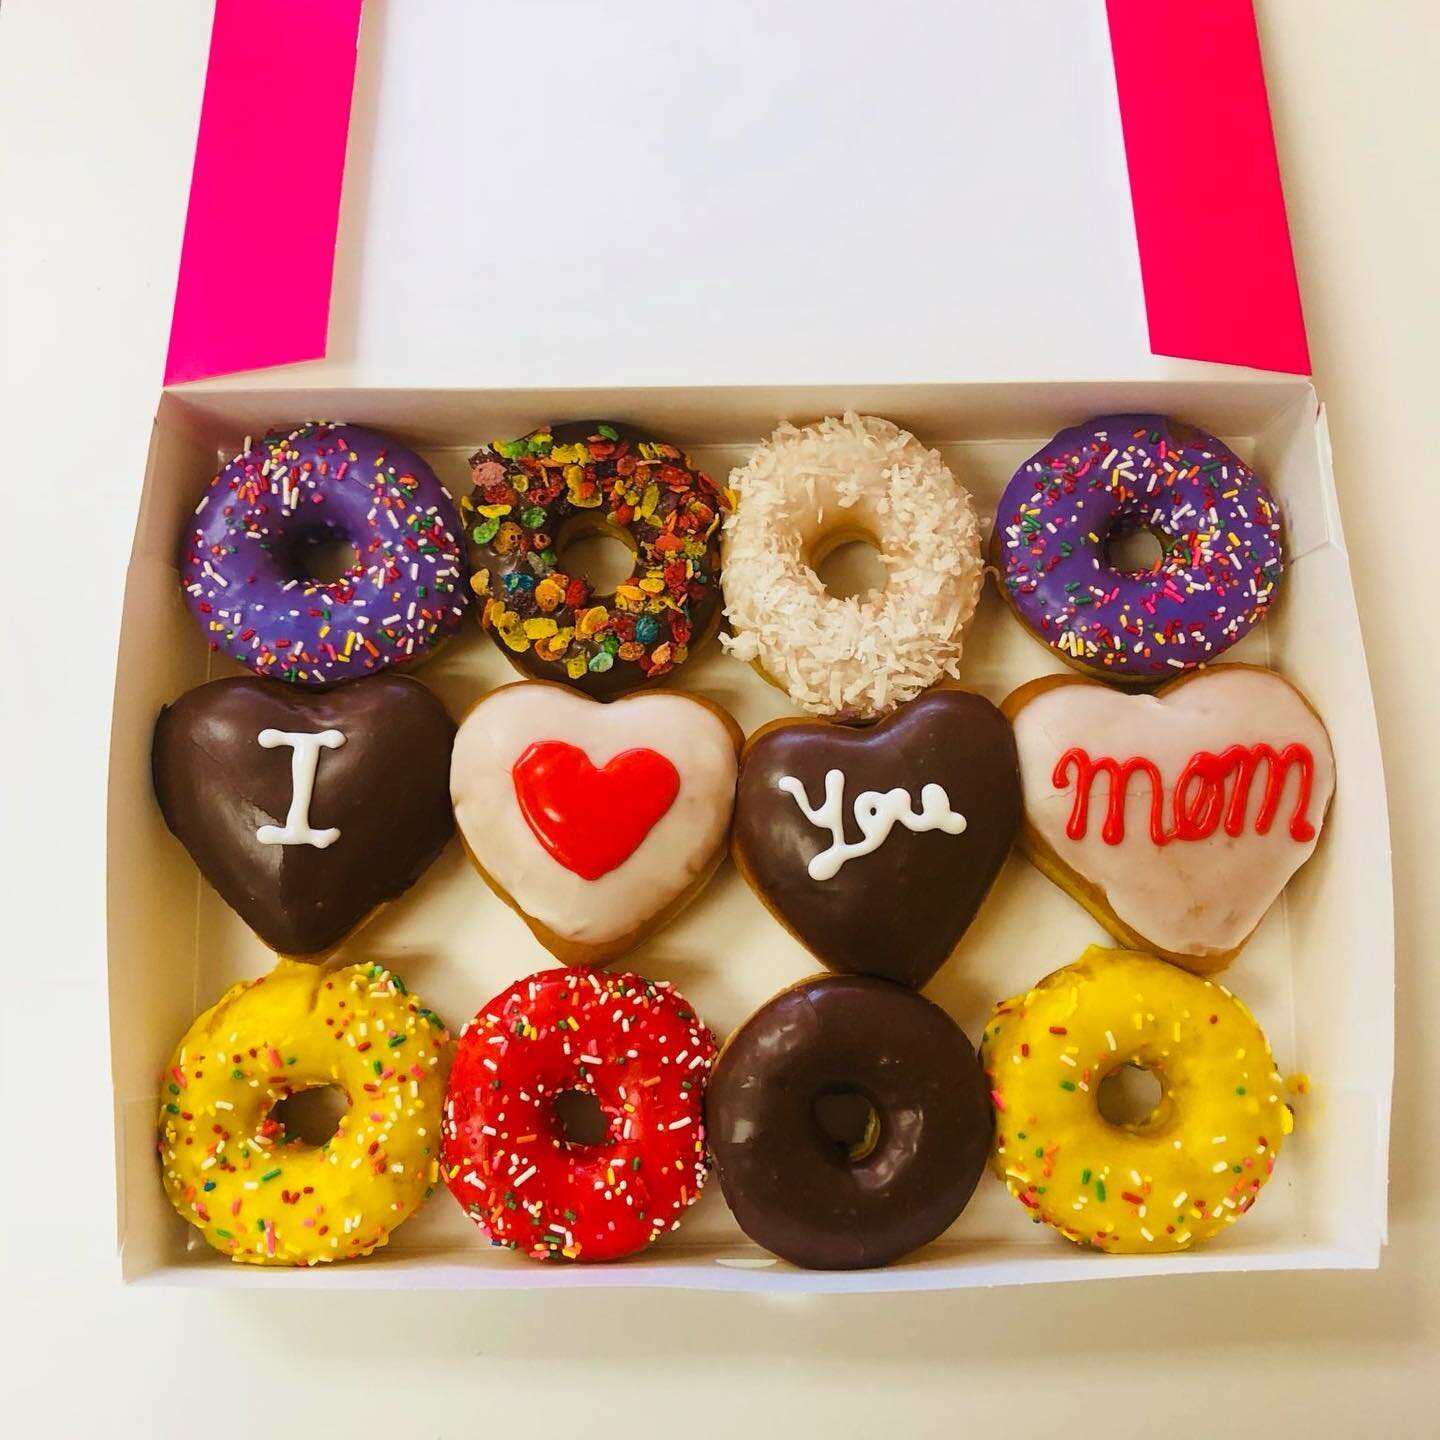 Mother Day&rsquo;s is Coming ! Show her your Love ❤️
Place your order 👇🏻👇🏻👇🏻 
&mdash;&mdash;&mdash;&mdash;&mdash;&mdash;&mdash;&mdash;&mdash;&mdash;&mdash;&mdash;&mdash;&mdash;&mdash;
🌎 www.masterdonutsatx.com 
📱512-215-2696
⏰Mon-Sat (5am to 